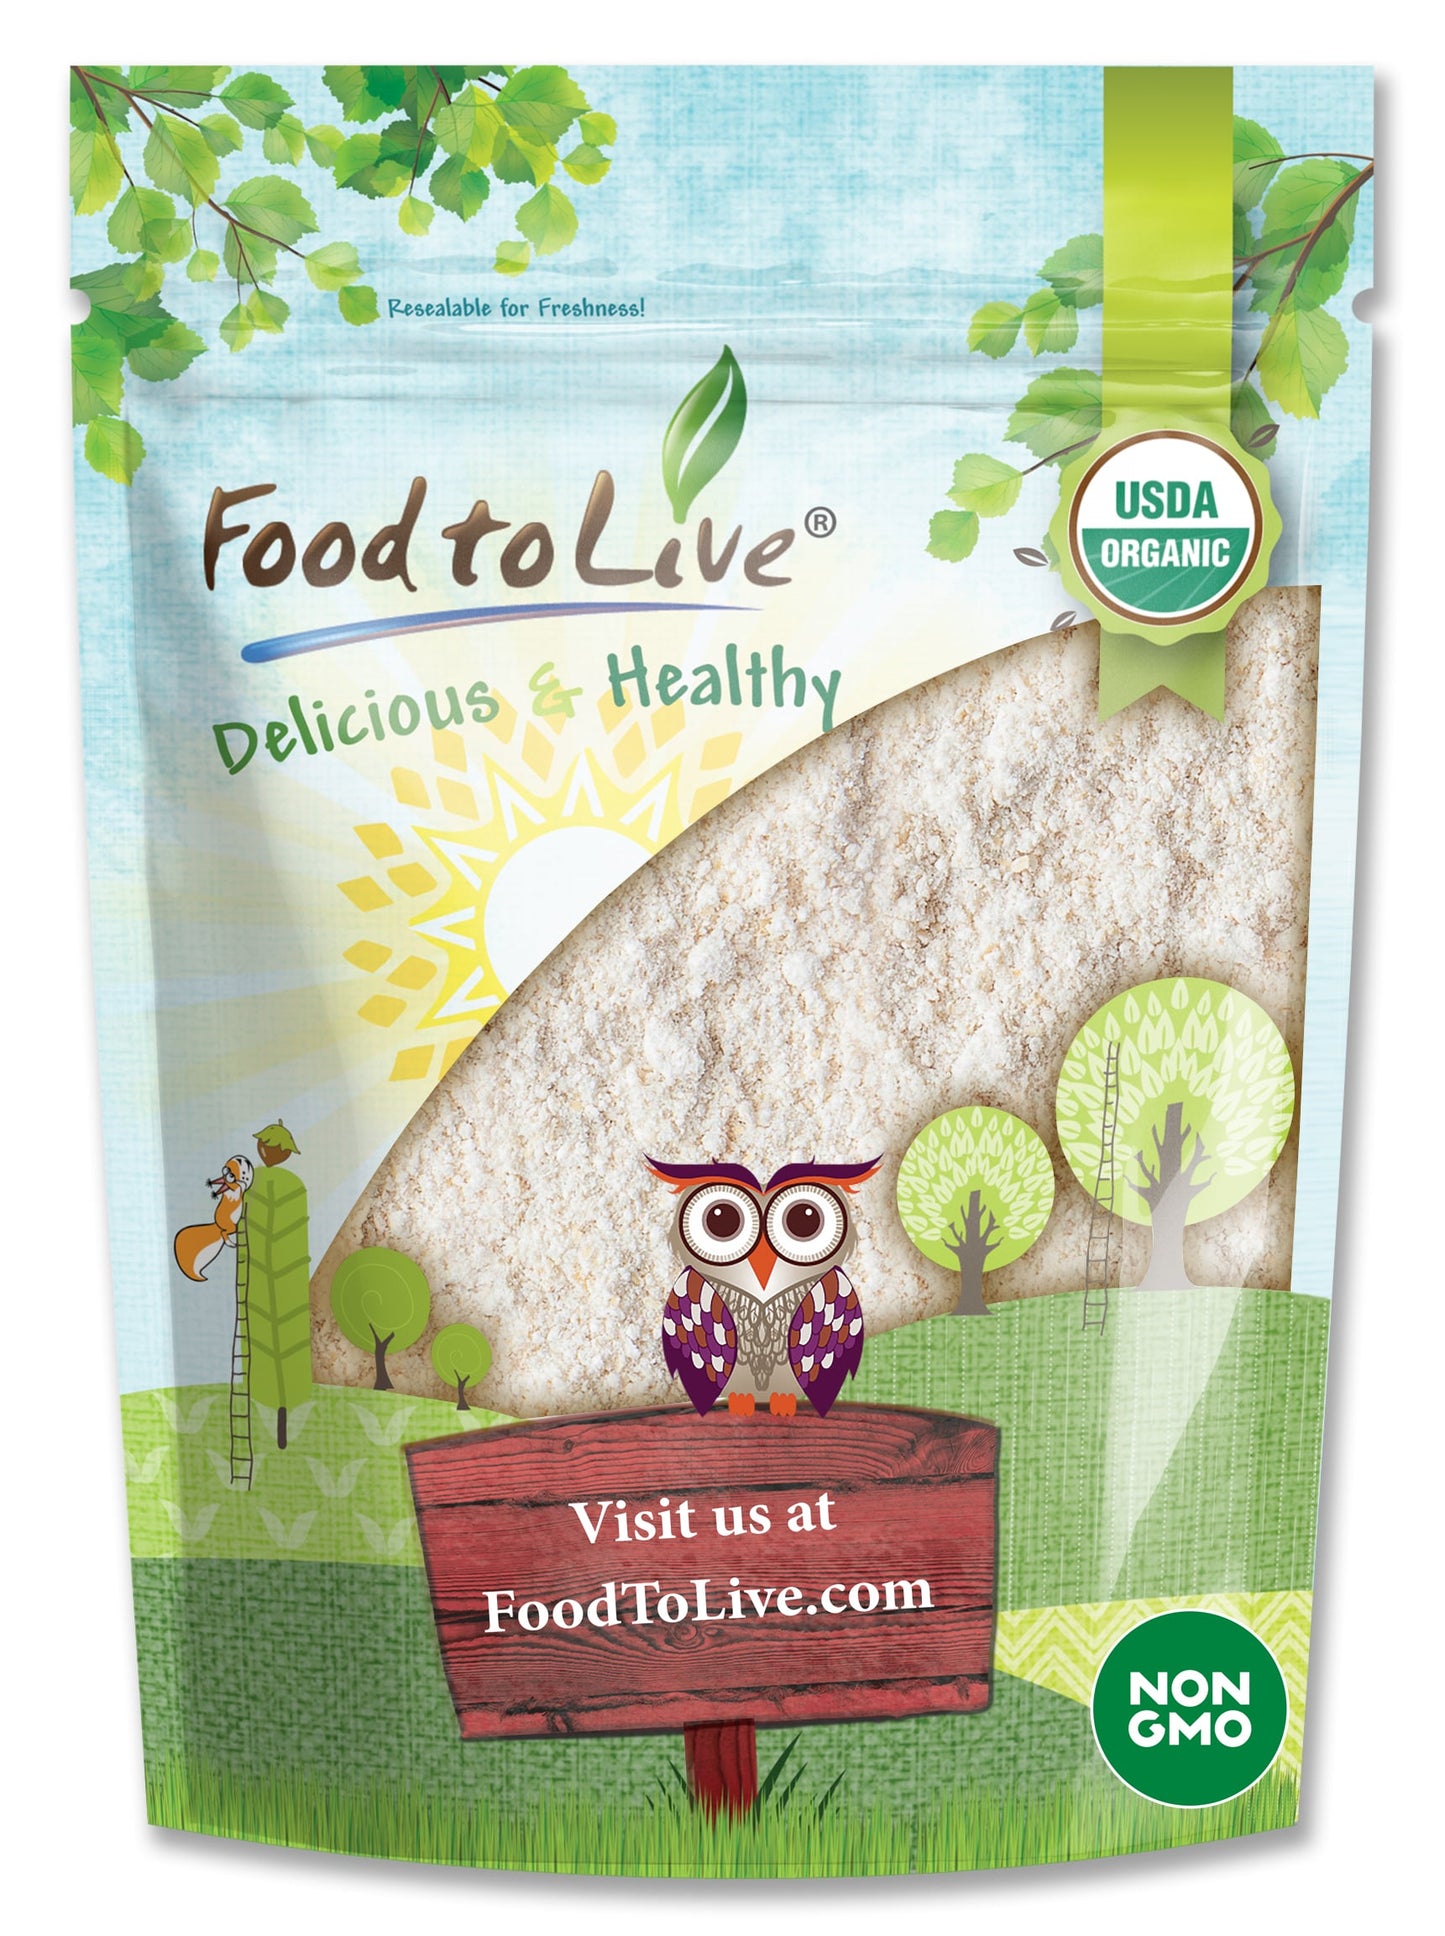 Organic White Sorghum Flour – Non-GMO, Finely Ground, Pure, Raw, Vegan,. Good Source of Protein and Fiber. Highly Nutritious. Great for Bread Baking, Pancakes, Cakes, Cookies, and Muffins